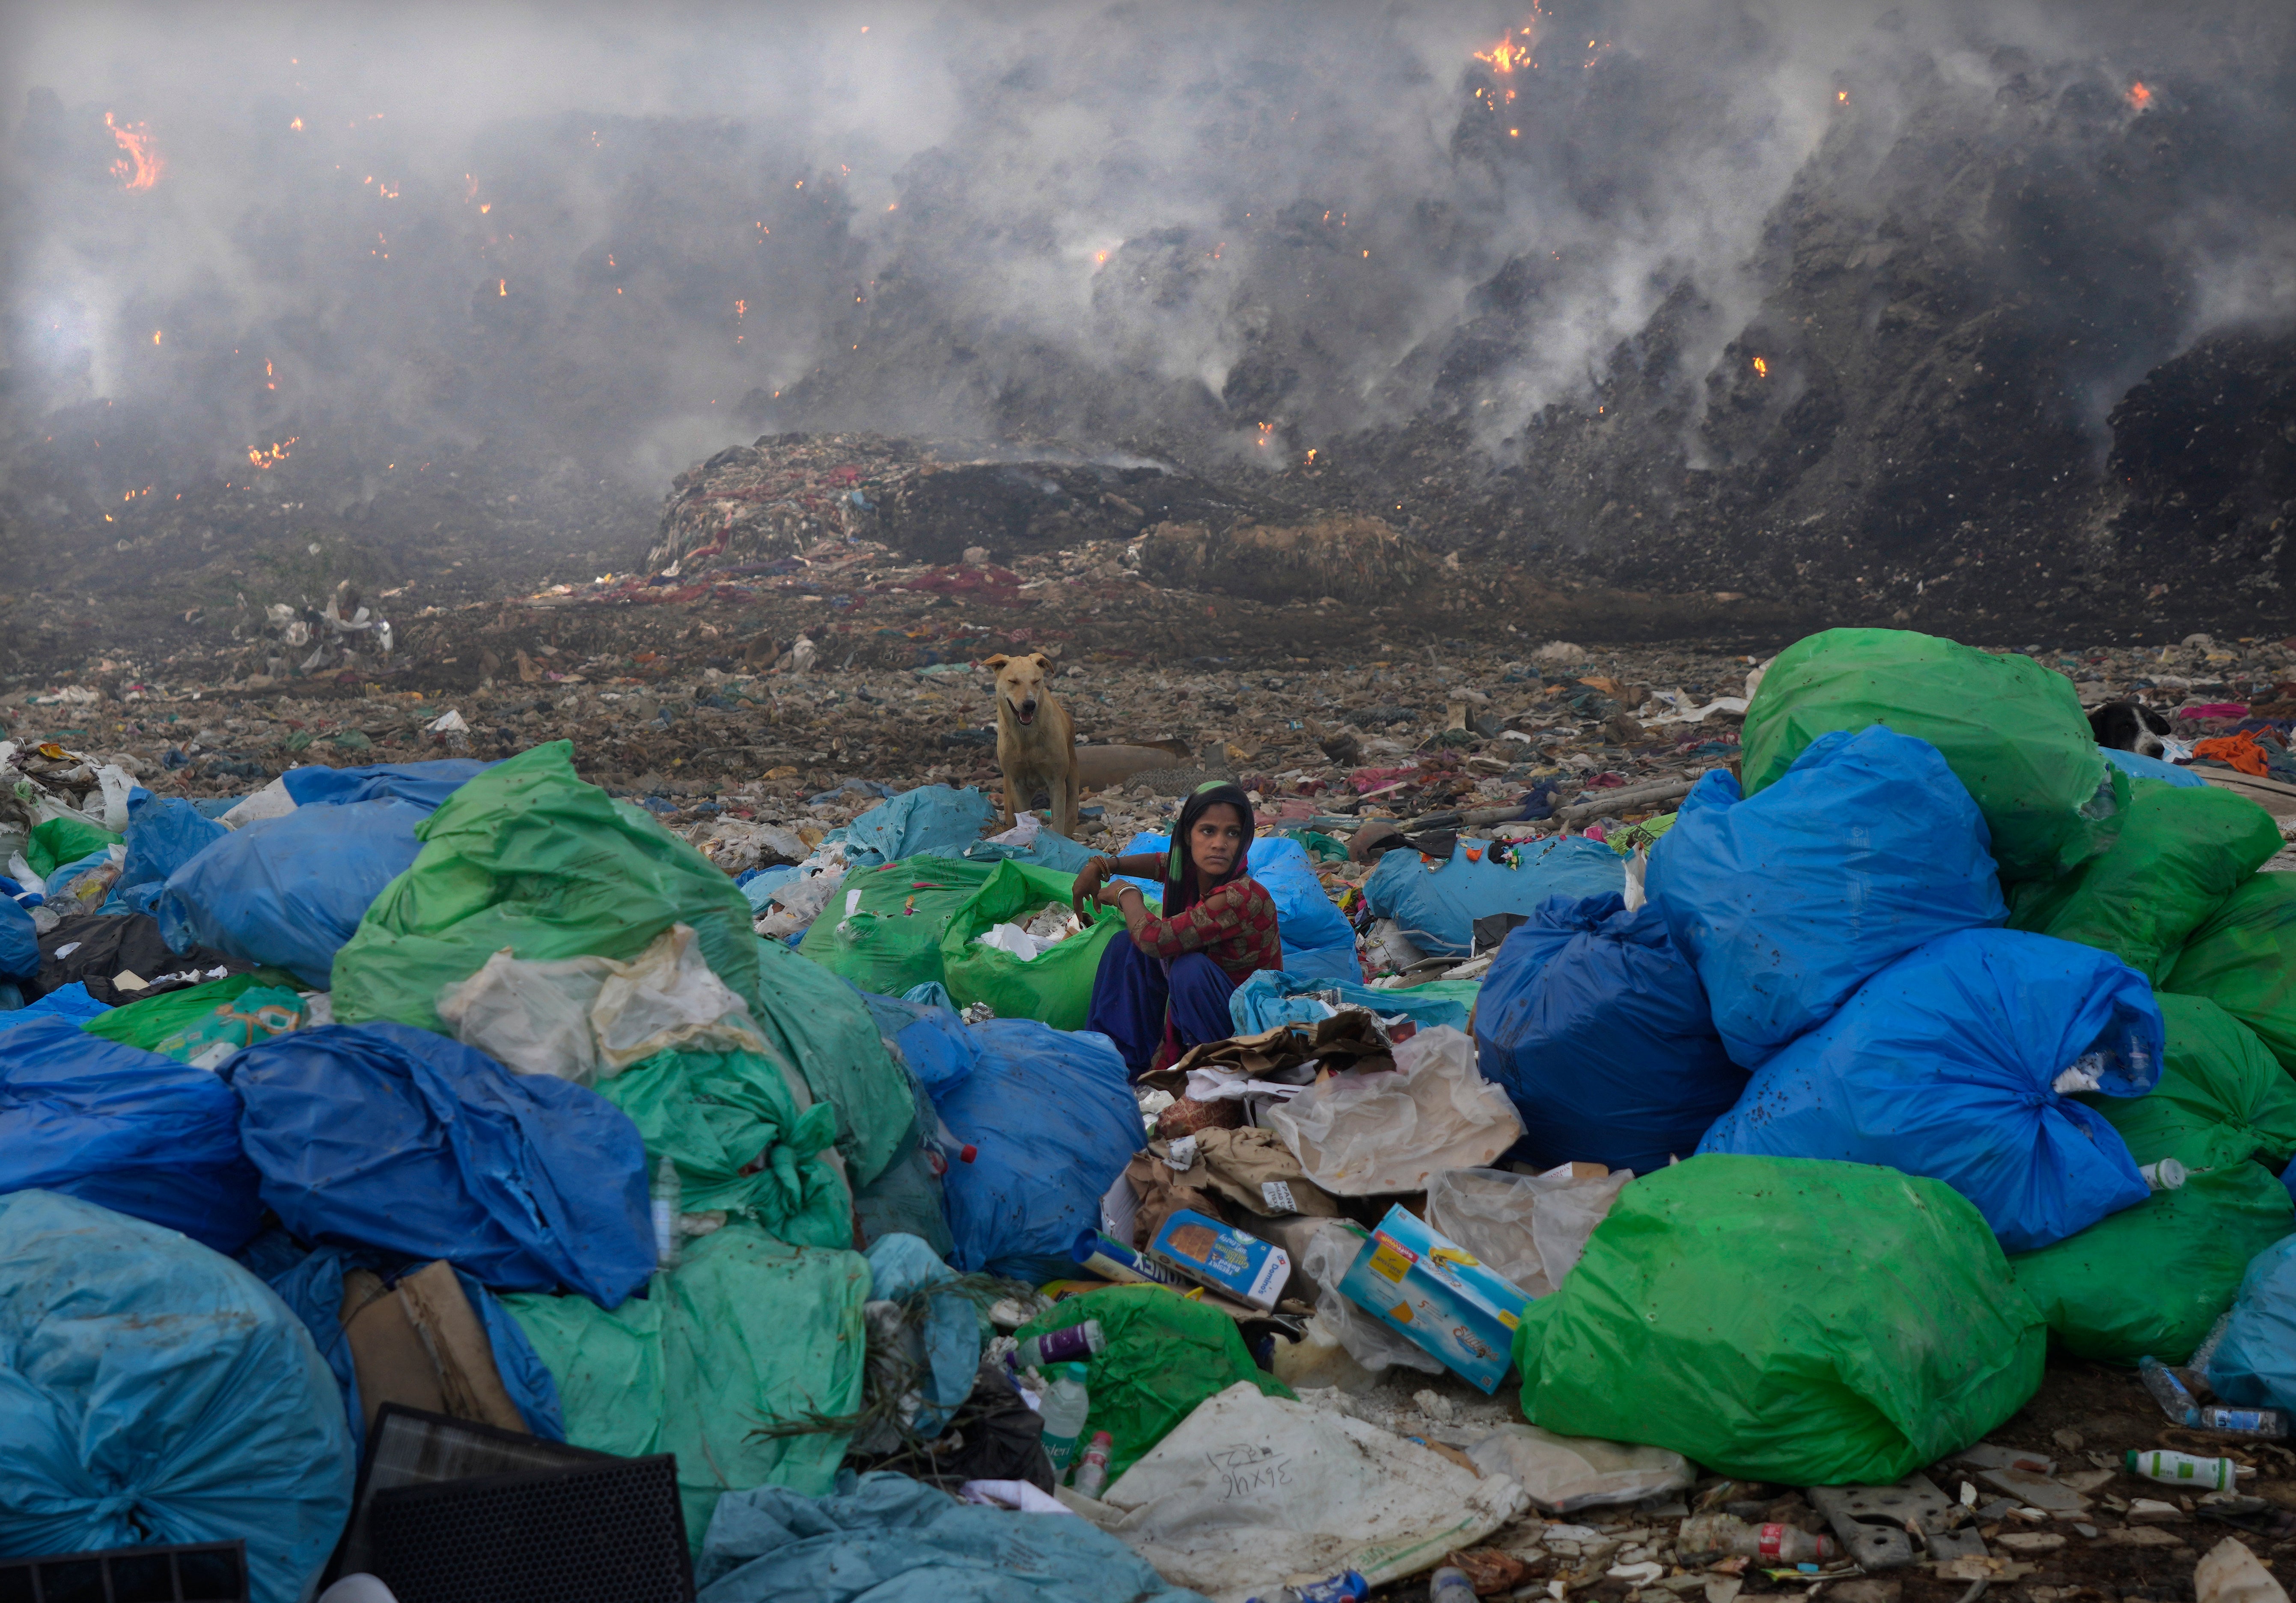 A woman looks for usable items in the landfill as the fire rages around her. (Photo: Manish Swarup, AP)